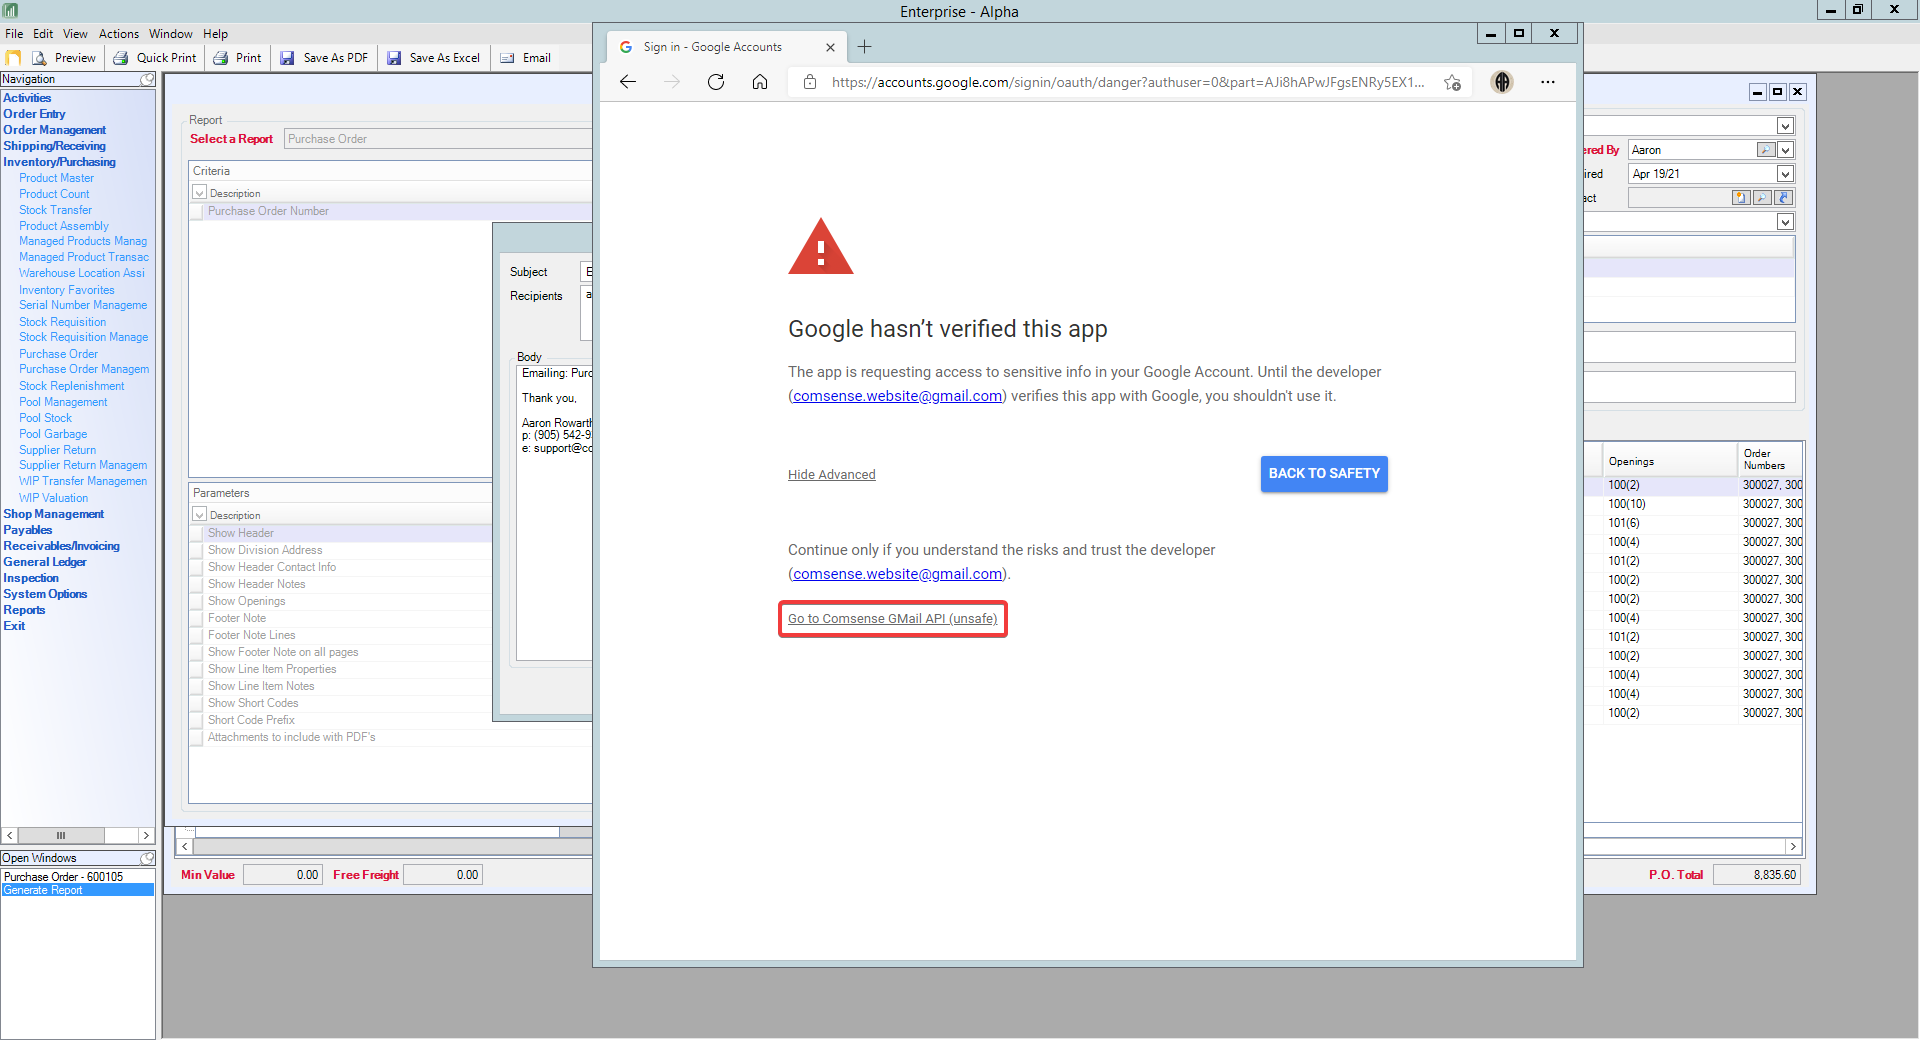 Sign in with Google window; Shows location of the Go to Comsense GMail API (unsafe) button.